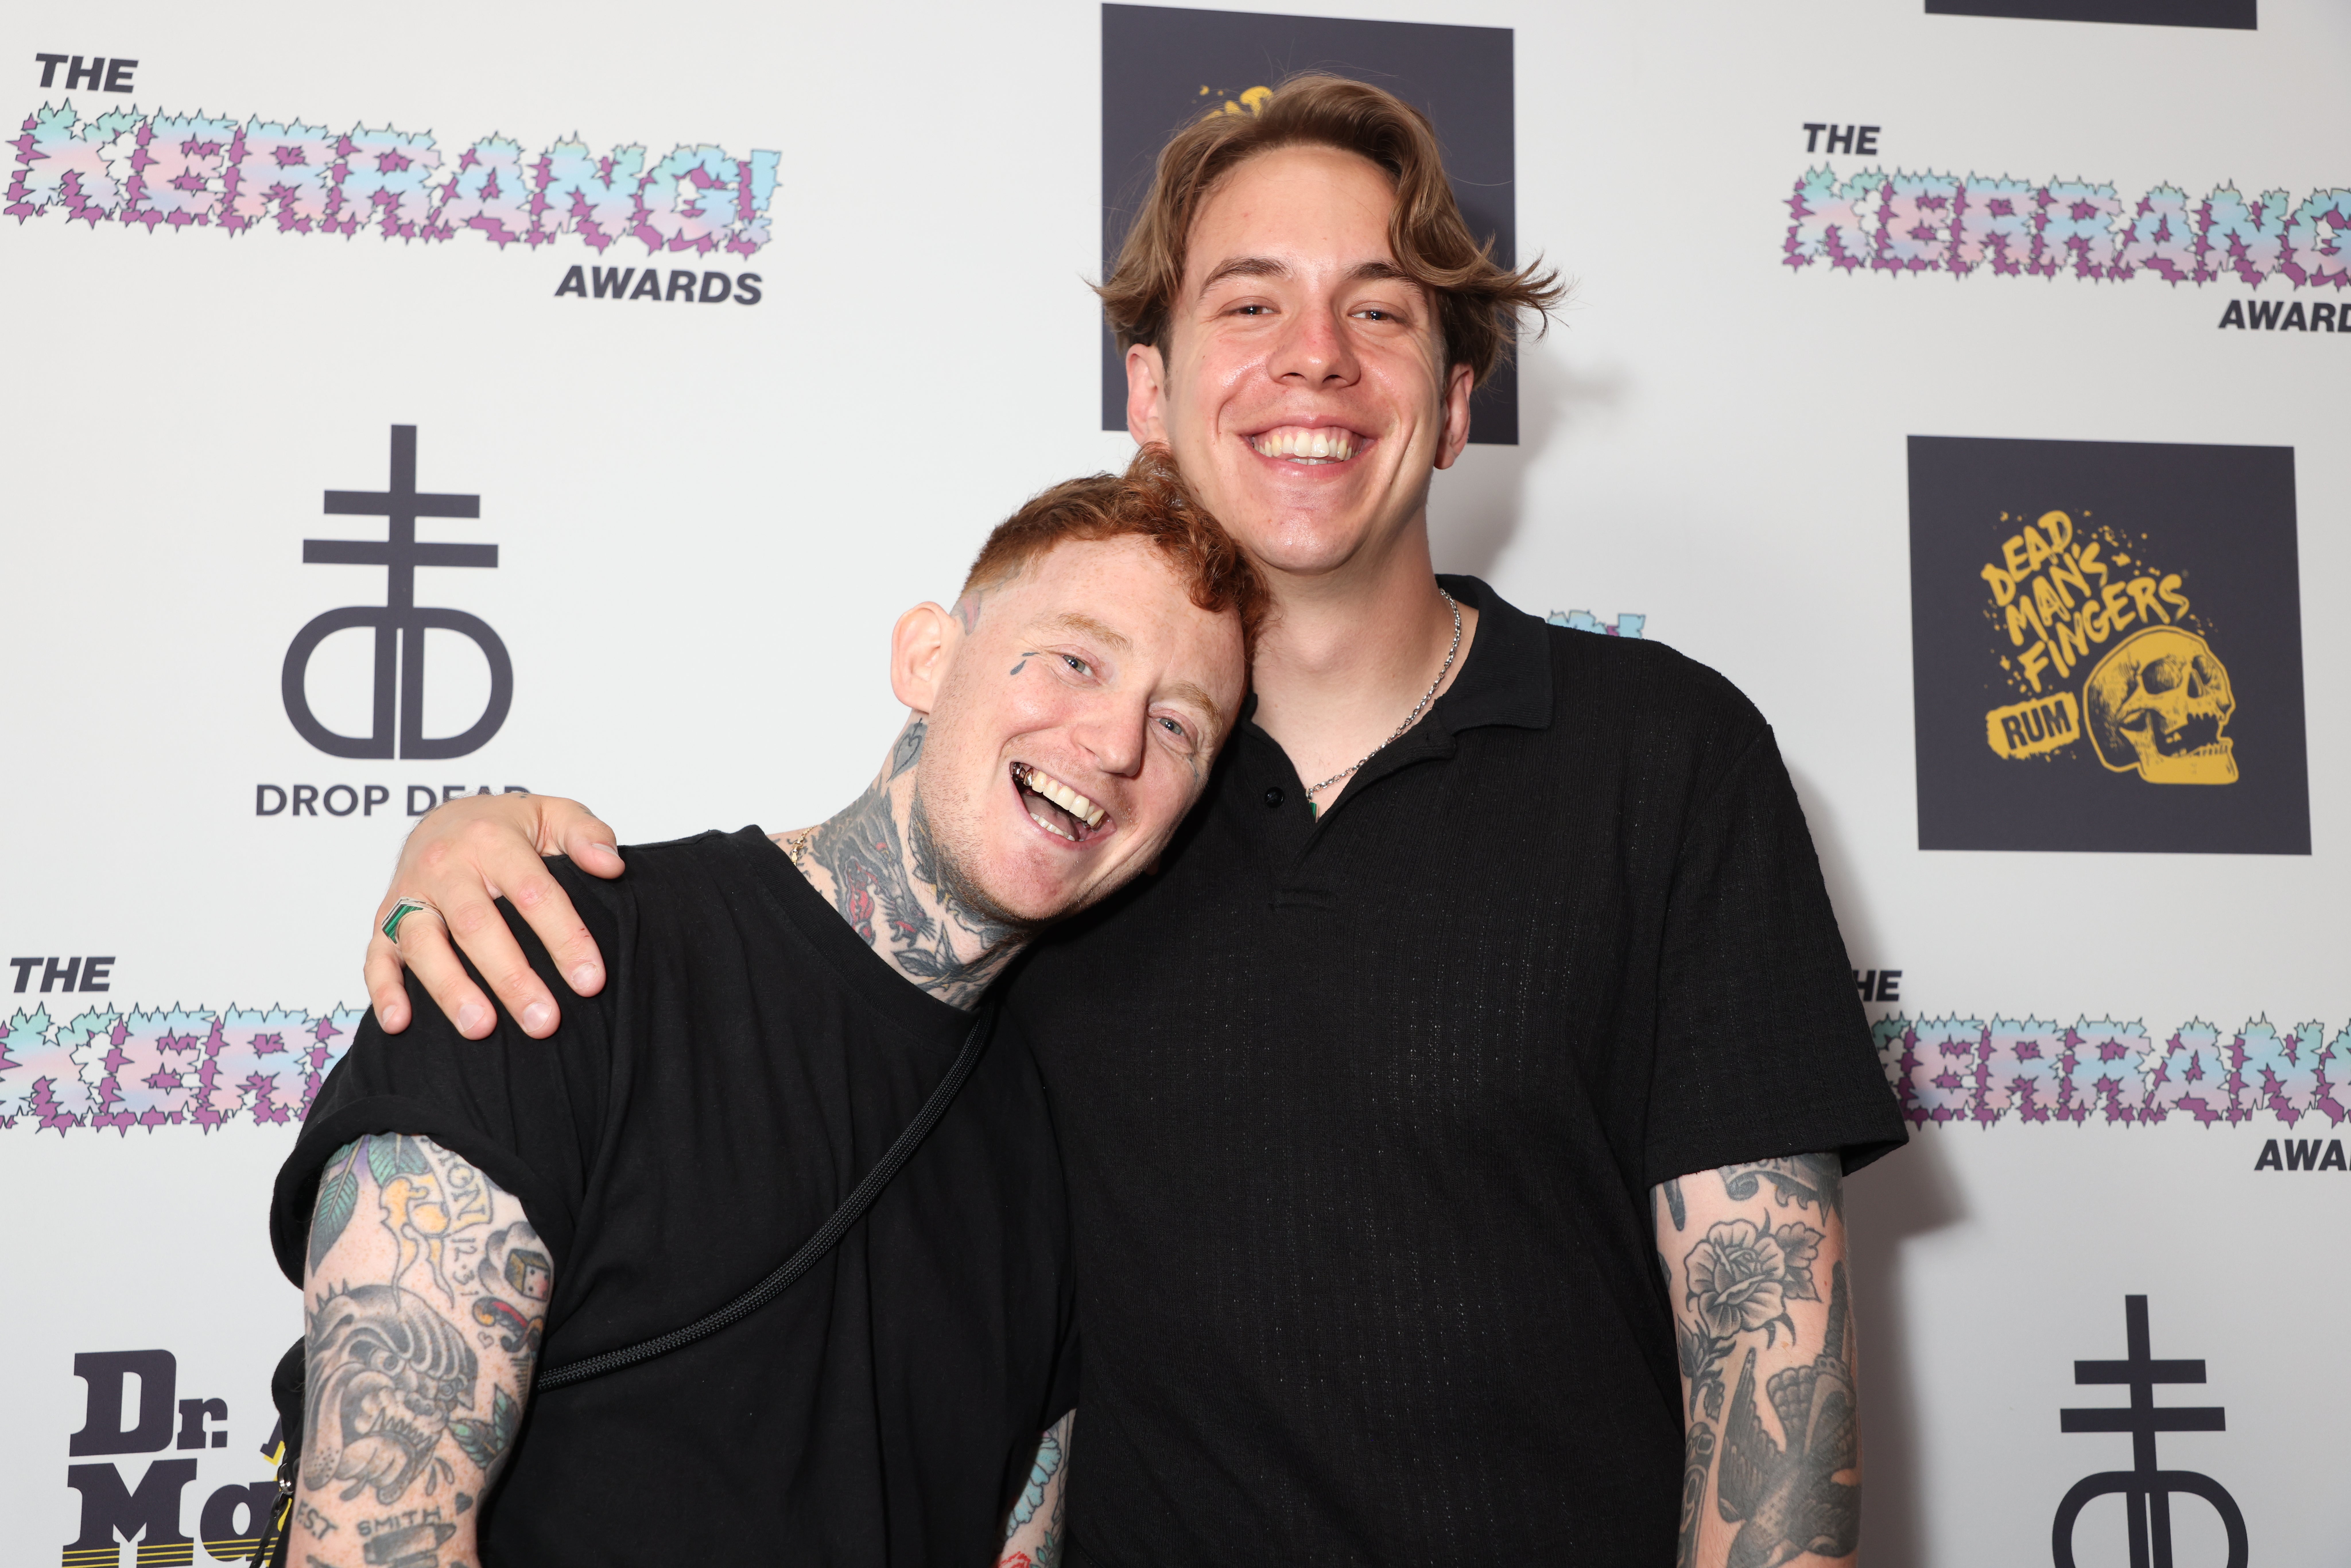 Frank Carter and Dean Richardson from Frank Carter & The Rattlesnakes attending the Kerrang! Awards (Suzan Moore/PA)